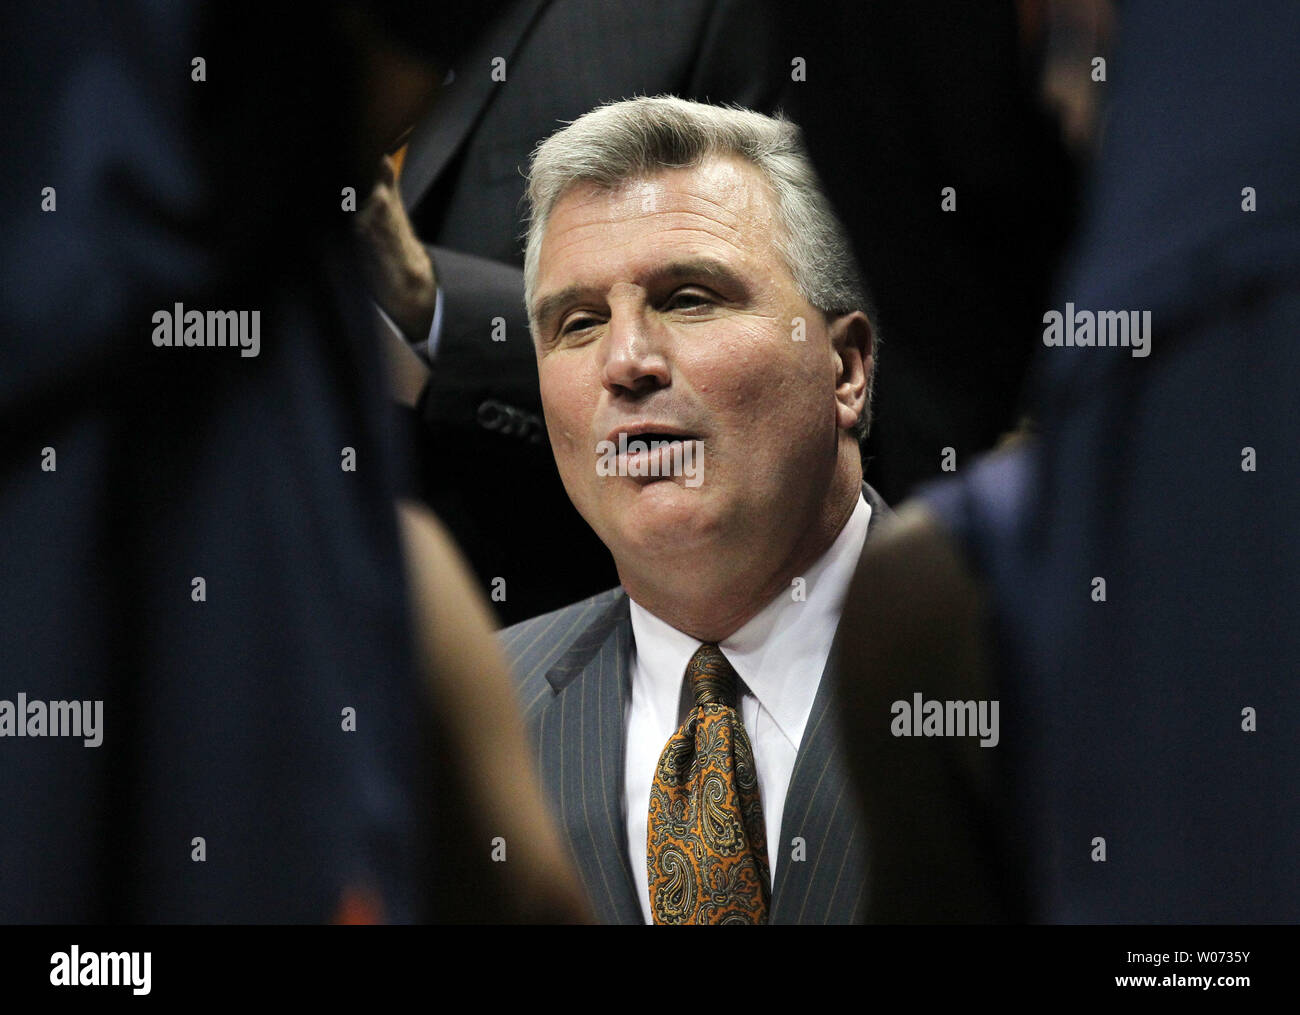 Illinois Head basketball coach Bruce Weber, shown in this December 21, 2011 file photo, has been fired by the University in Champaign, Illinois on March 9, 2012. Weber in his ninth year, guided Illinois to a 17-15 record this season. UPI/Bill Greenblatt/Files Stock Photo